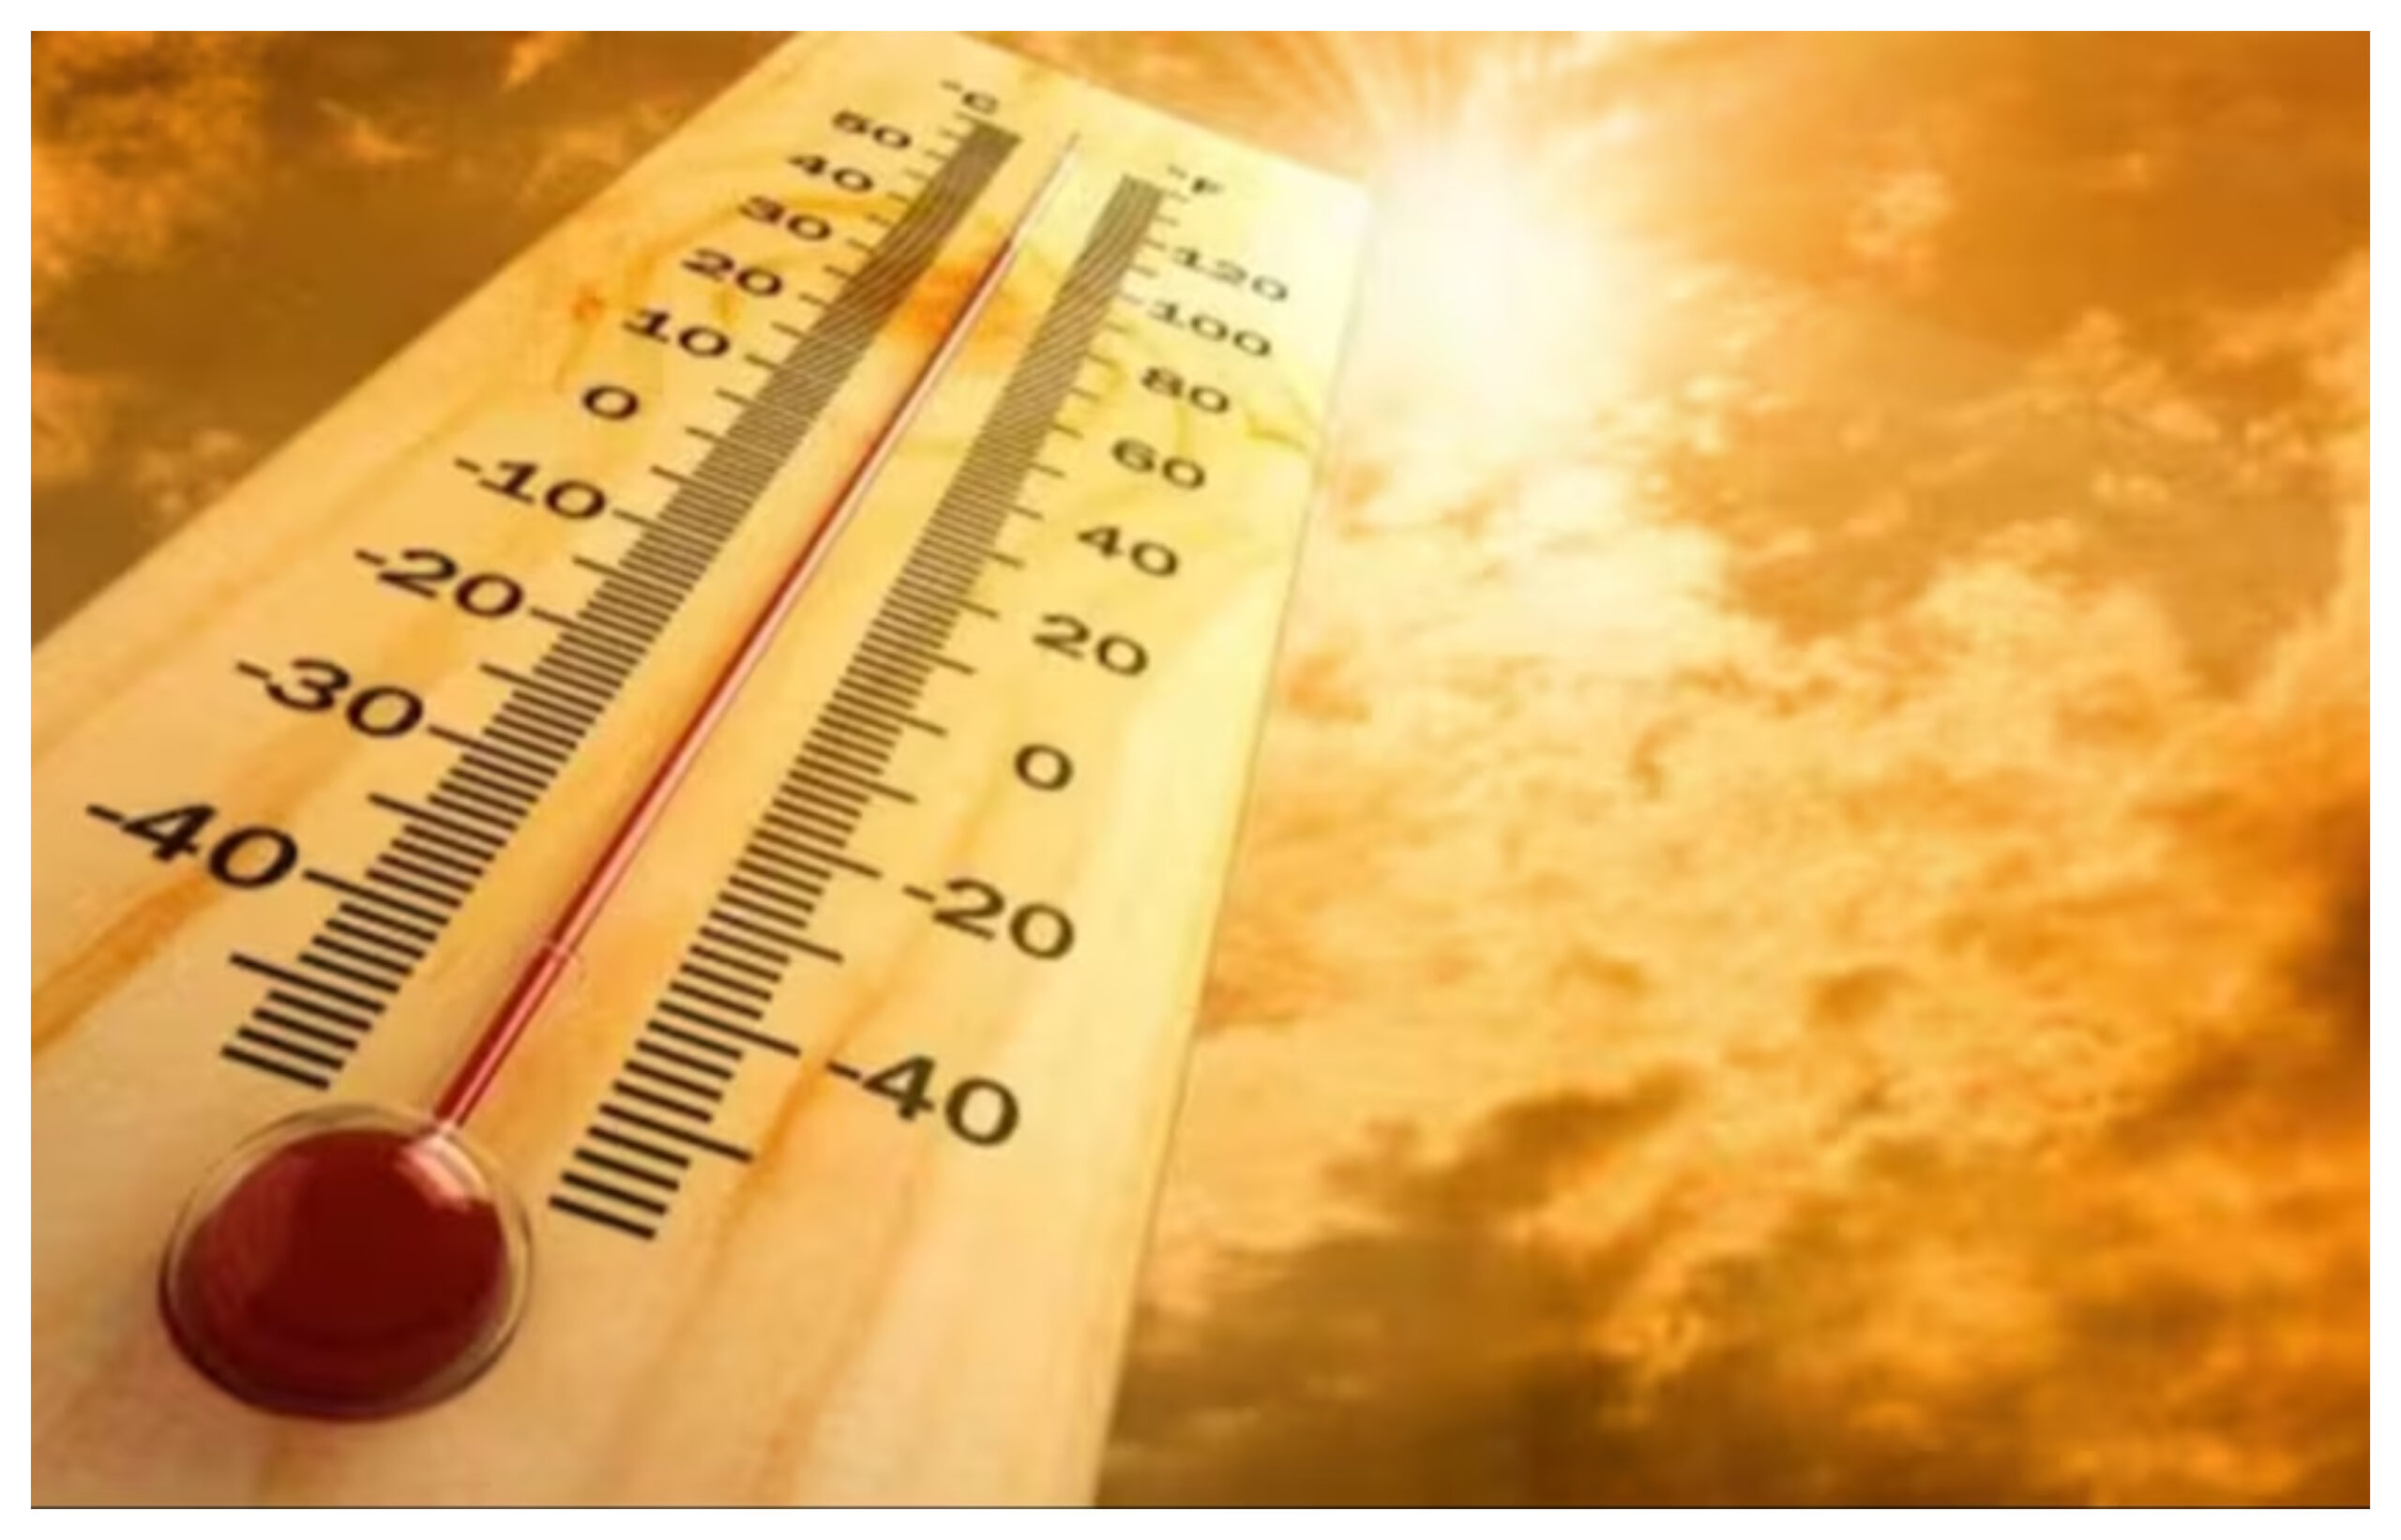 West Bengal Weather: IMD issues heatwave alert in West Bengal till April 30, West bengal weather update news, today latest news in hindi